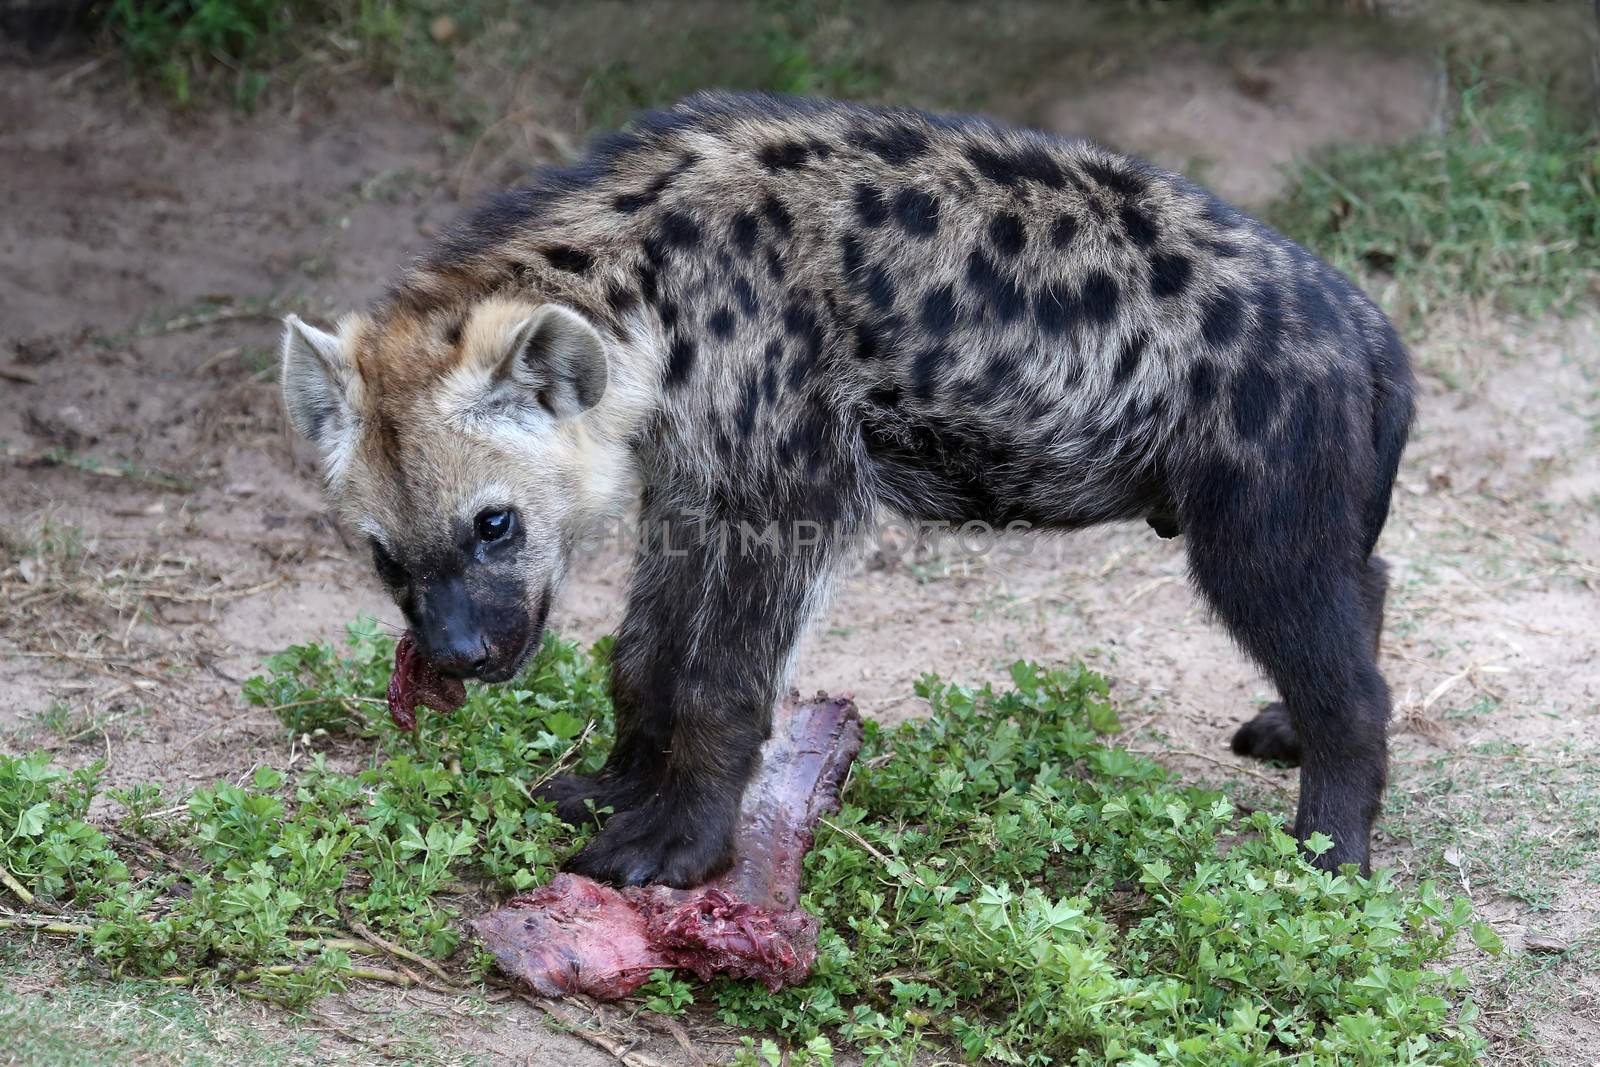 Young hyena cub eating red meat from it's prey